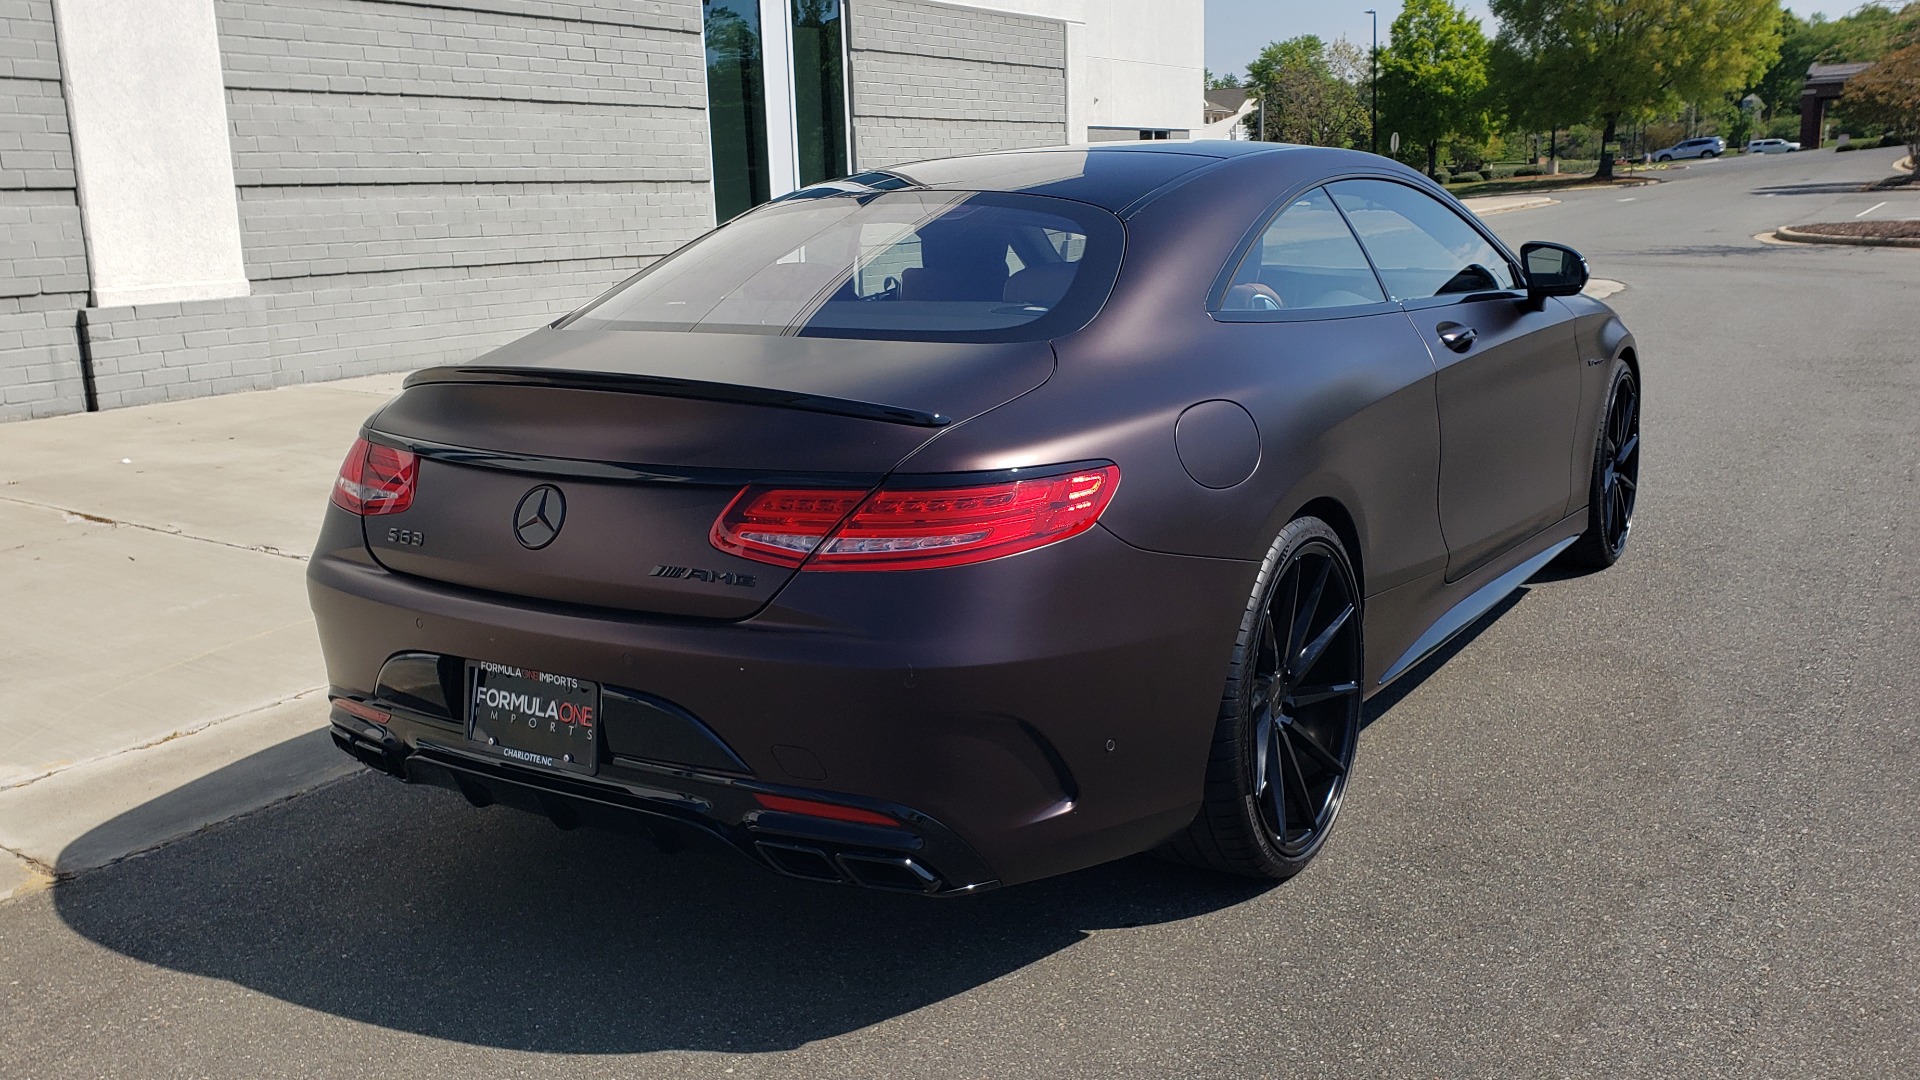 Used 2017 Mercedes-Benz S-CLASS AMG S 63 / NAV / SUNROOF / CUSTOM WRAP / BLACK VOSSEN WHEELS for sale Sold at Formula Imports in Charlotte NC 28227 7